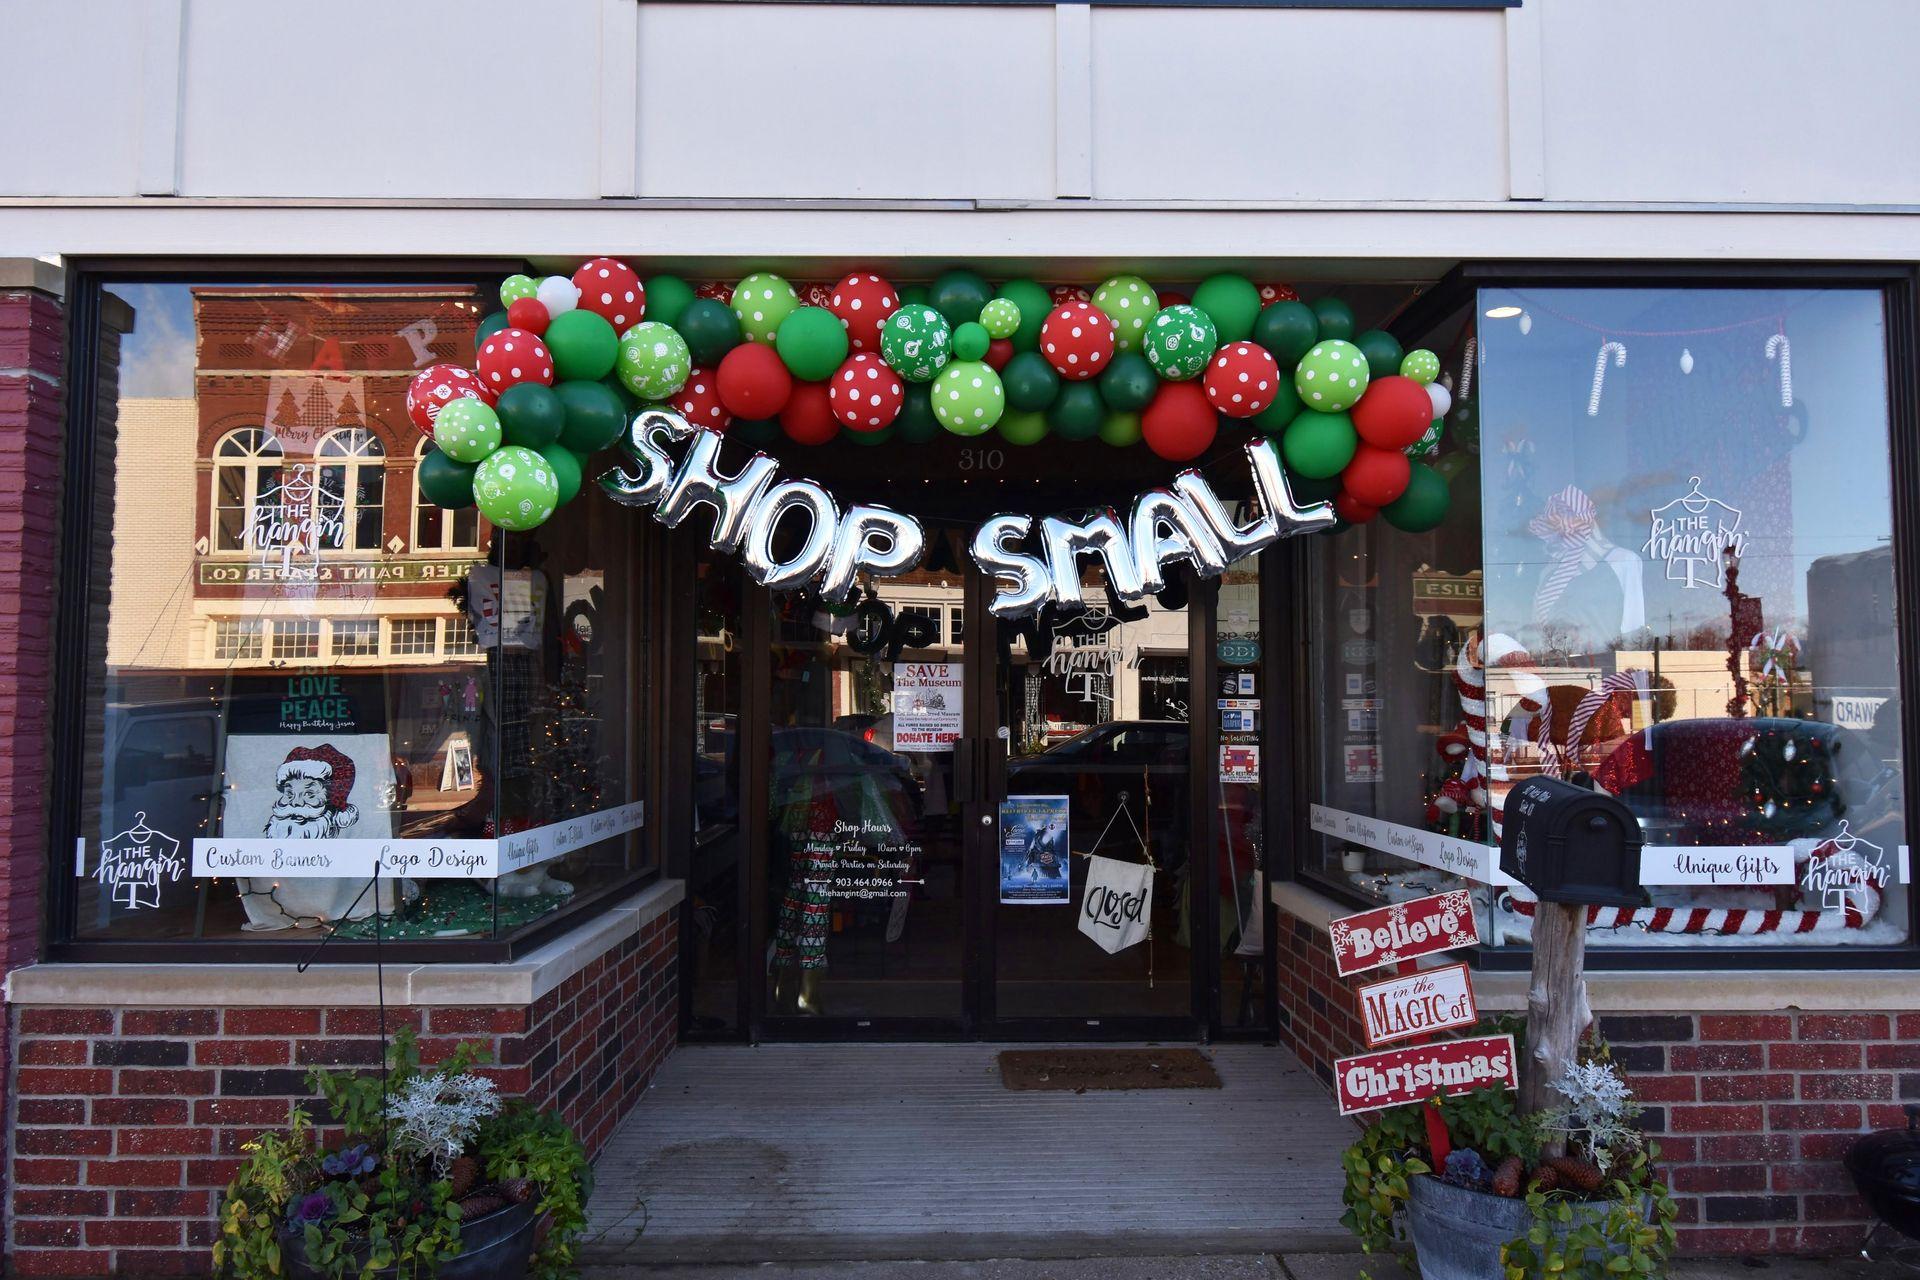 A shop with balloons that read "Shop Small" in Downtown Denison